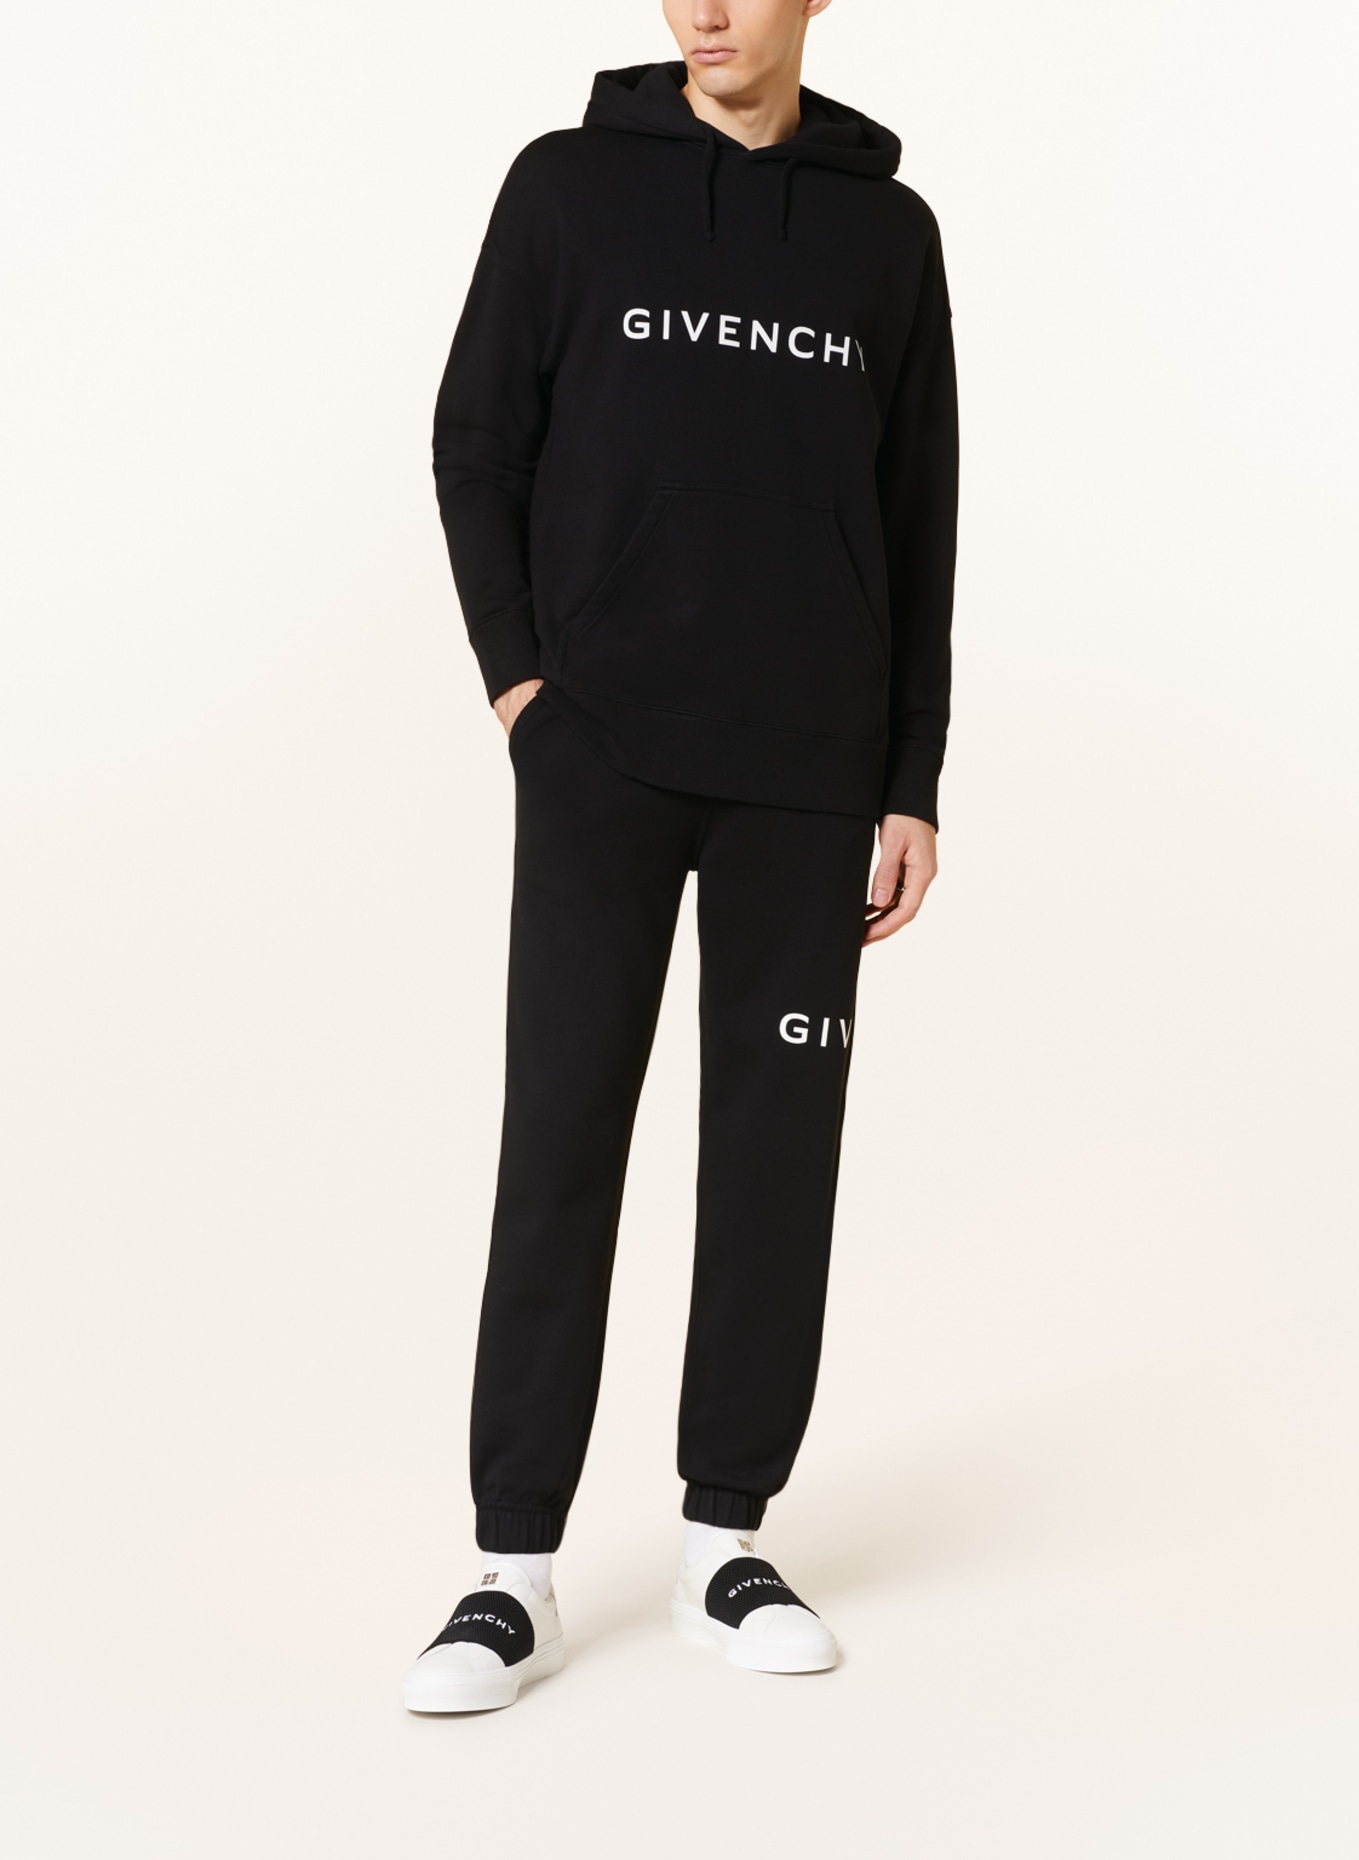 GIVENCHY Pants in jogger style, Color: BLACK (Image 2)